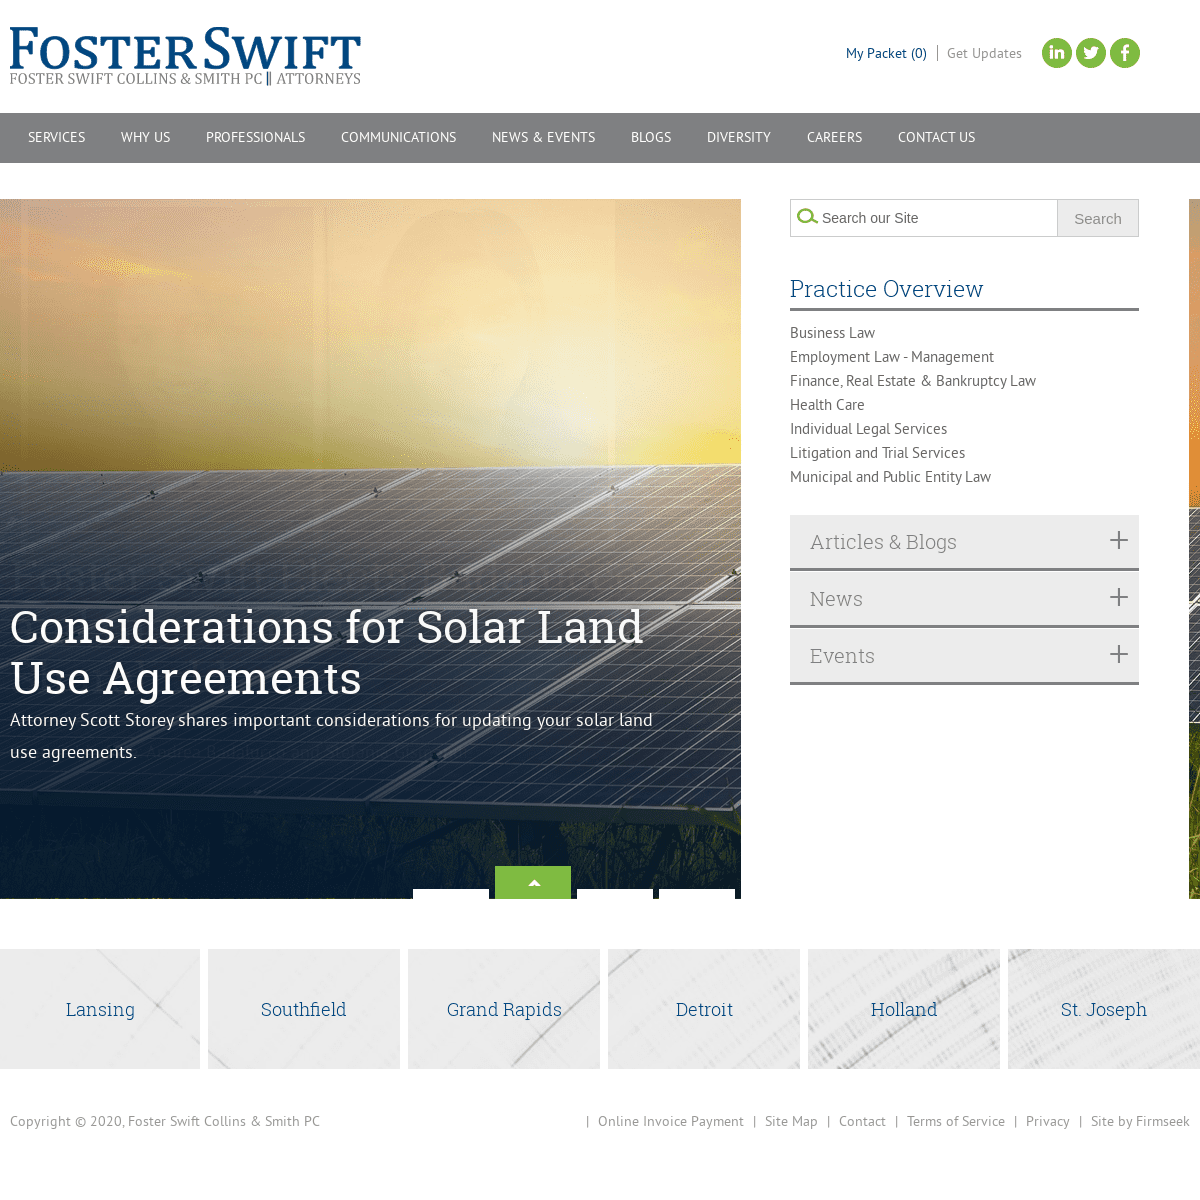 A complete backup of fosterswift.com